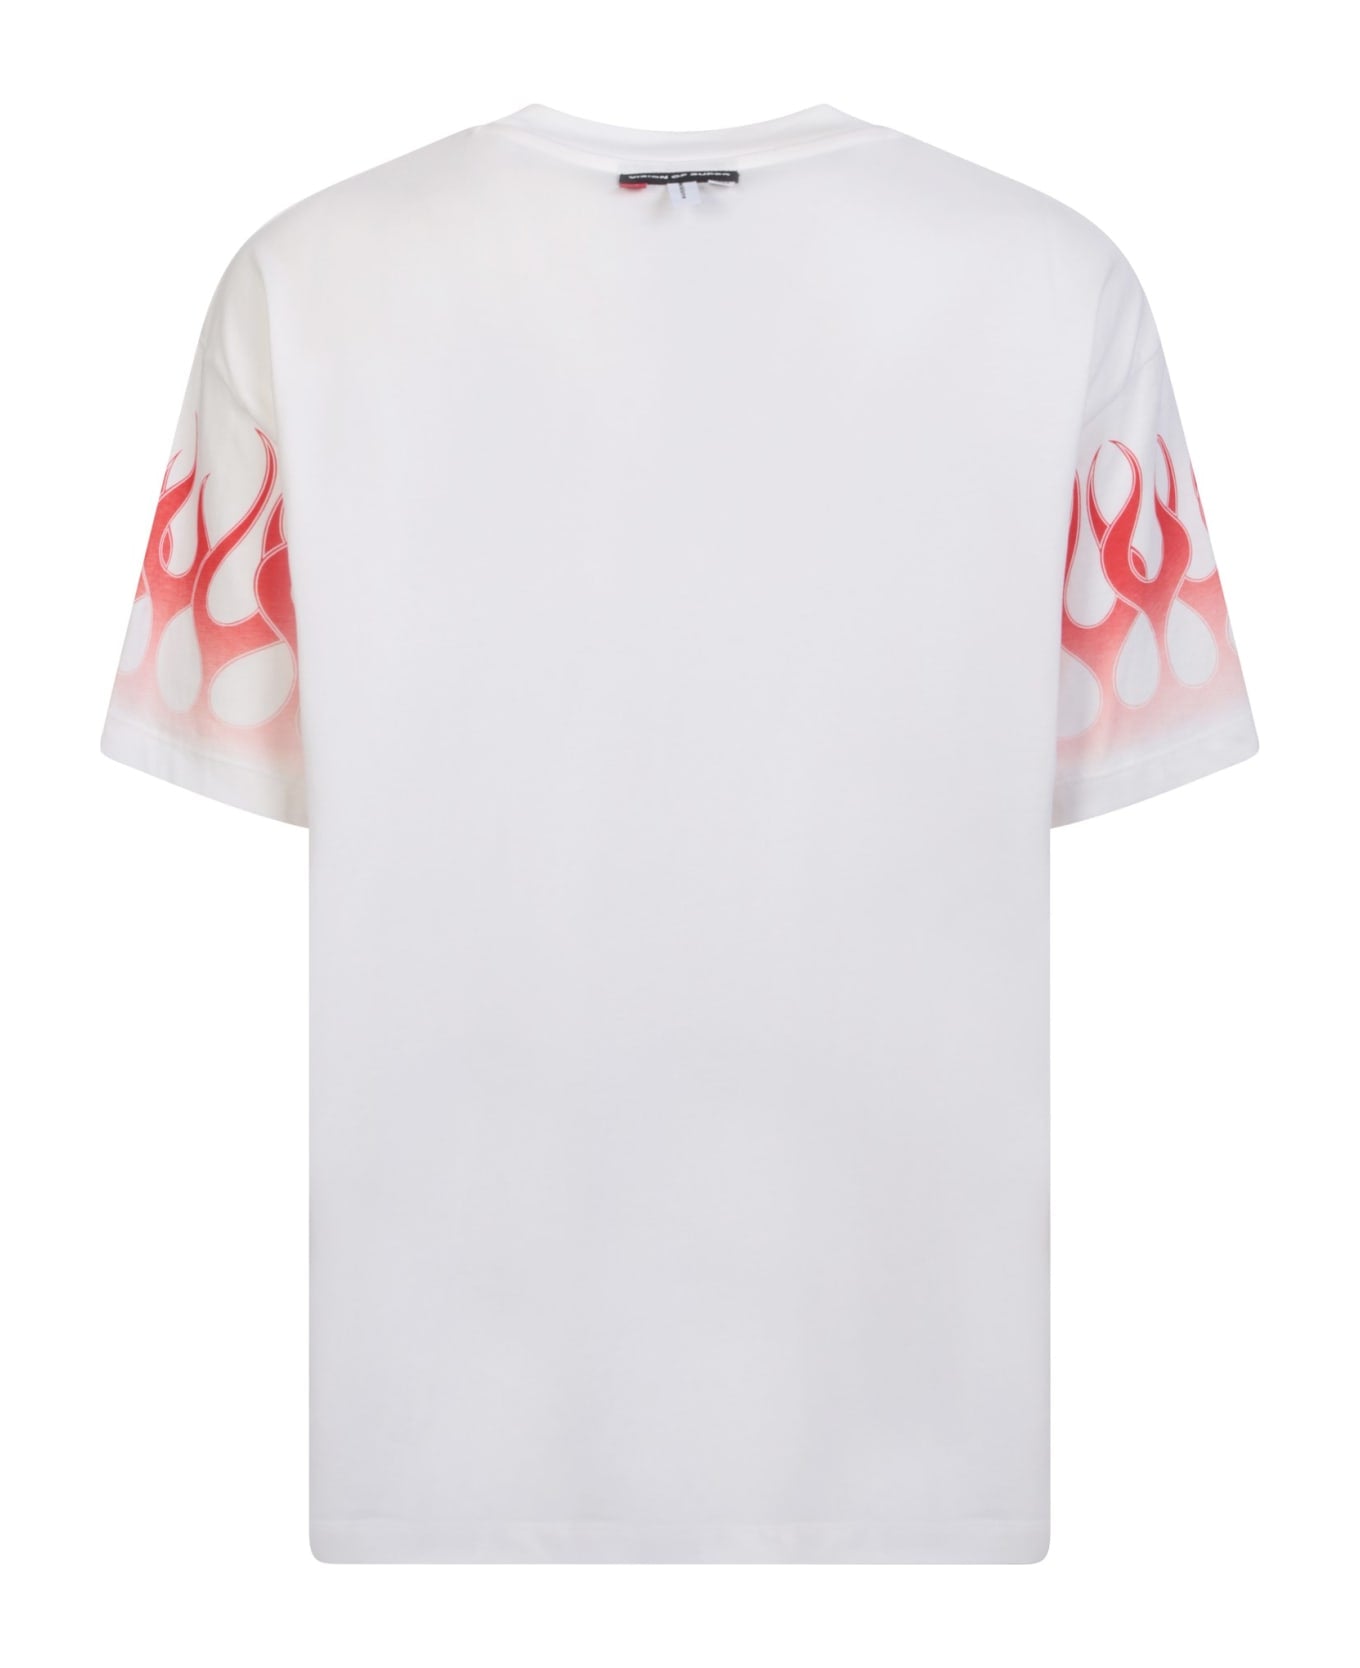 Vision Of Super Vs00756/473 Tshirt With Flames White